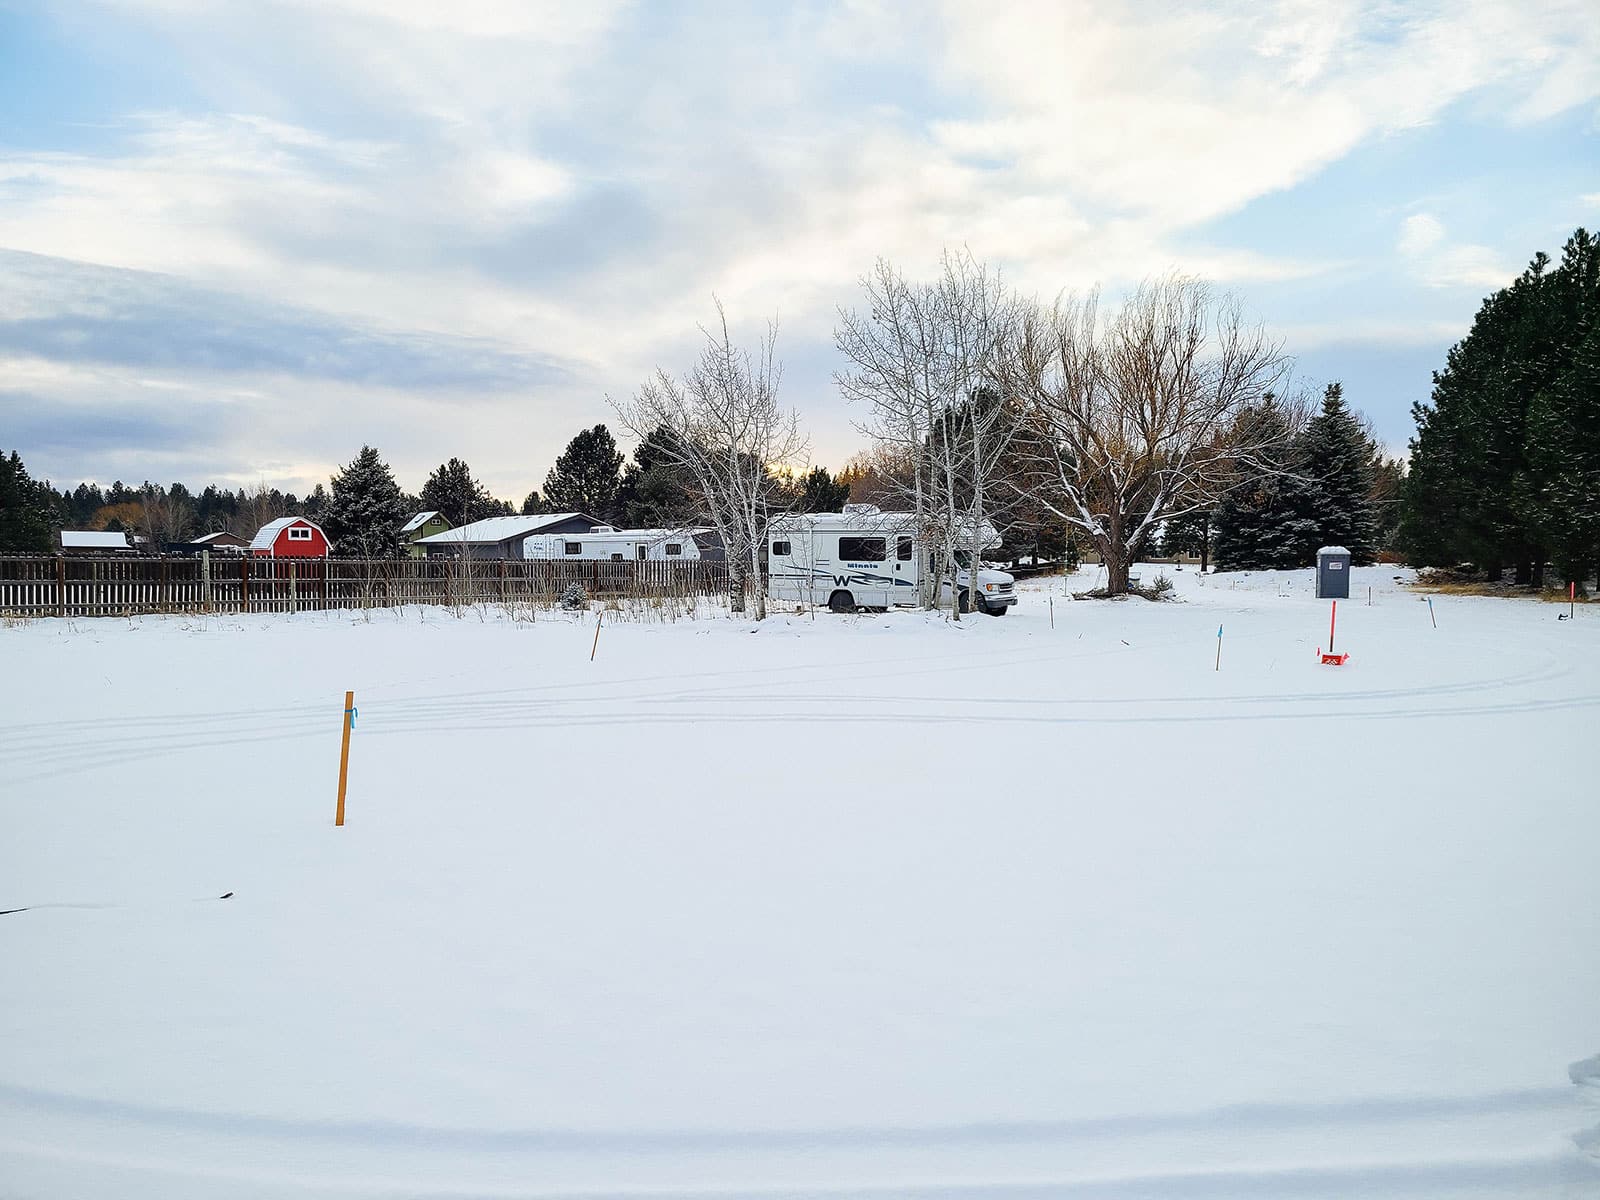 A snowy yard with survey stakes in the ground and an RV parked in the background